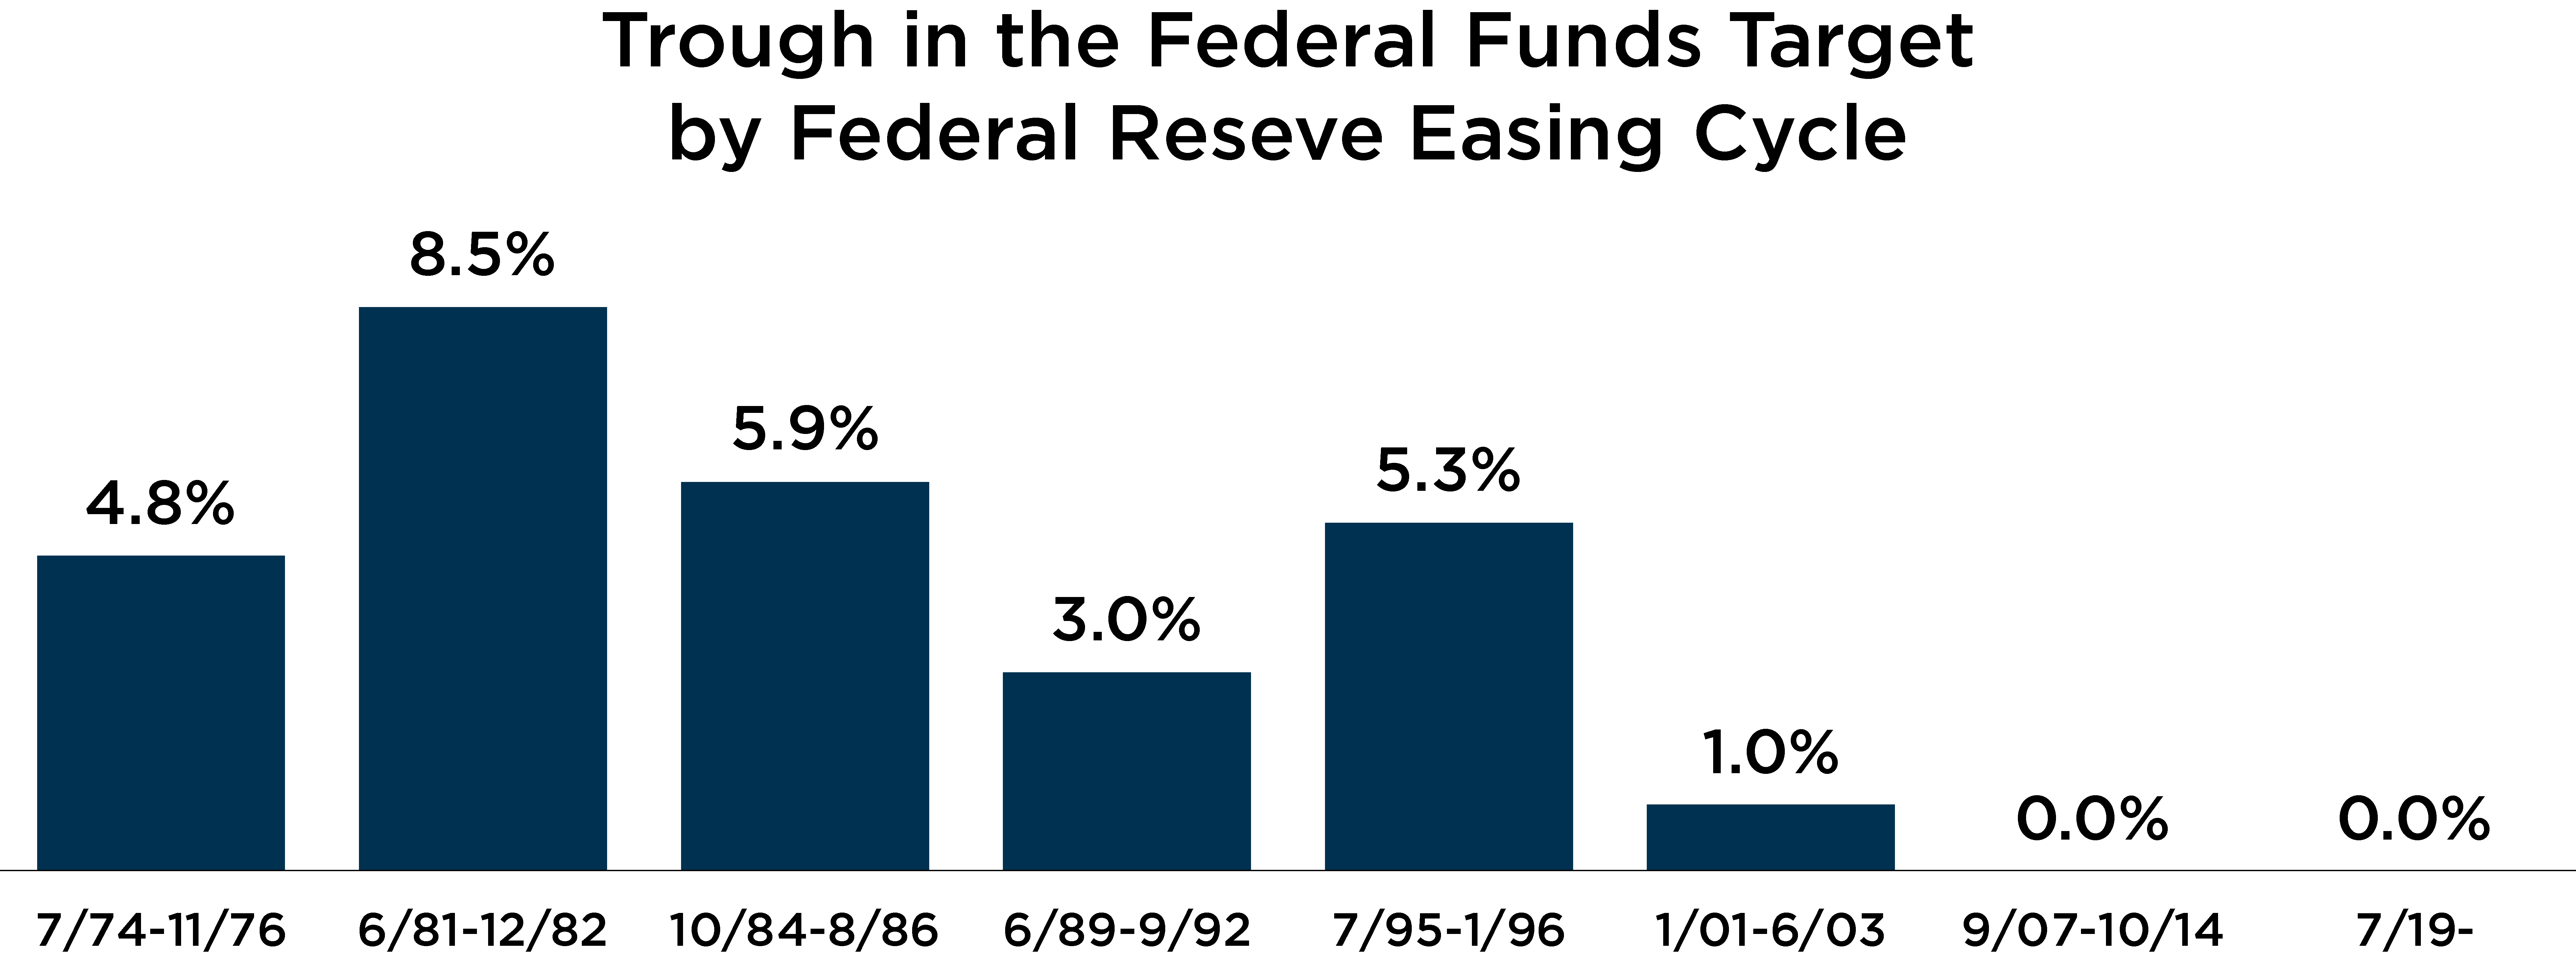 Graph depicting trough in the federal funds target by federal reserve easing cycle